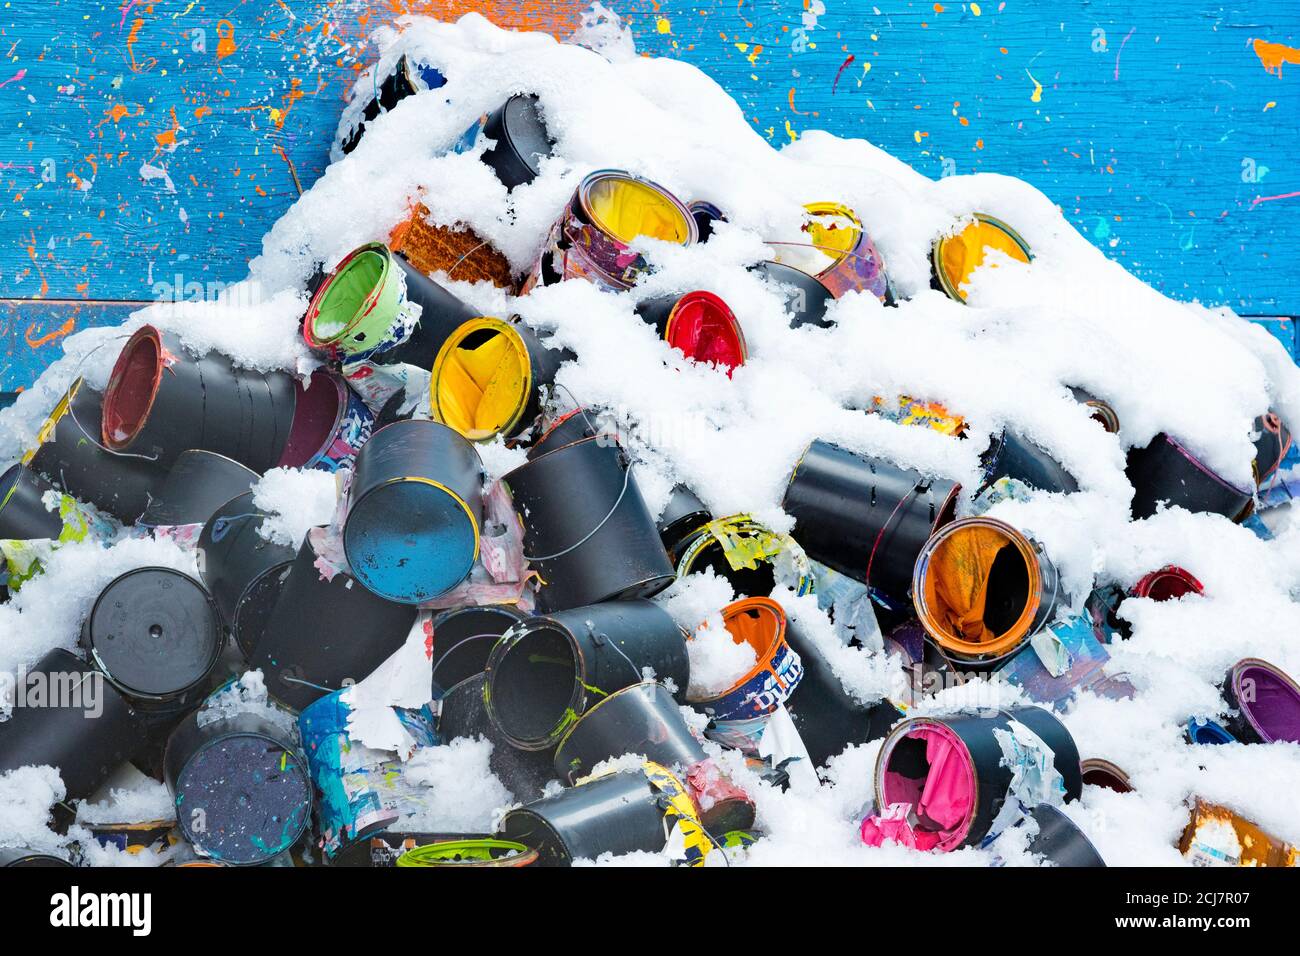 Pile of empty discarded paint cans showing colours under snow. Stock Photo